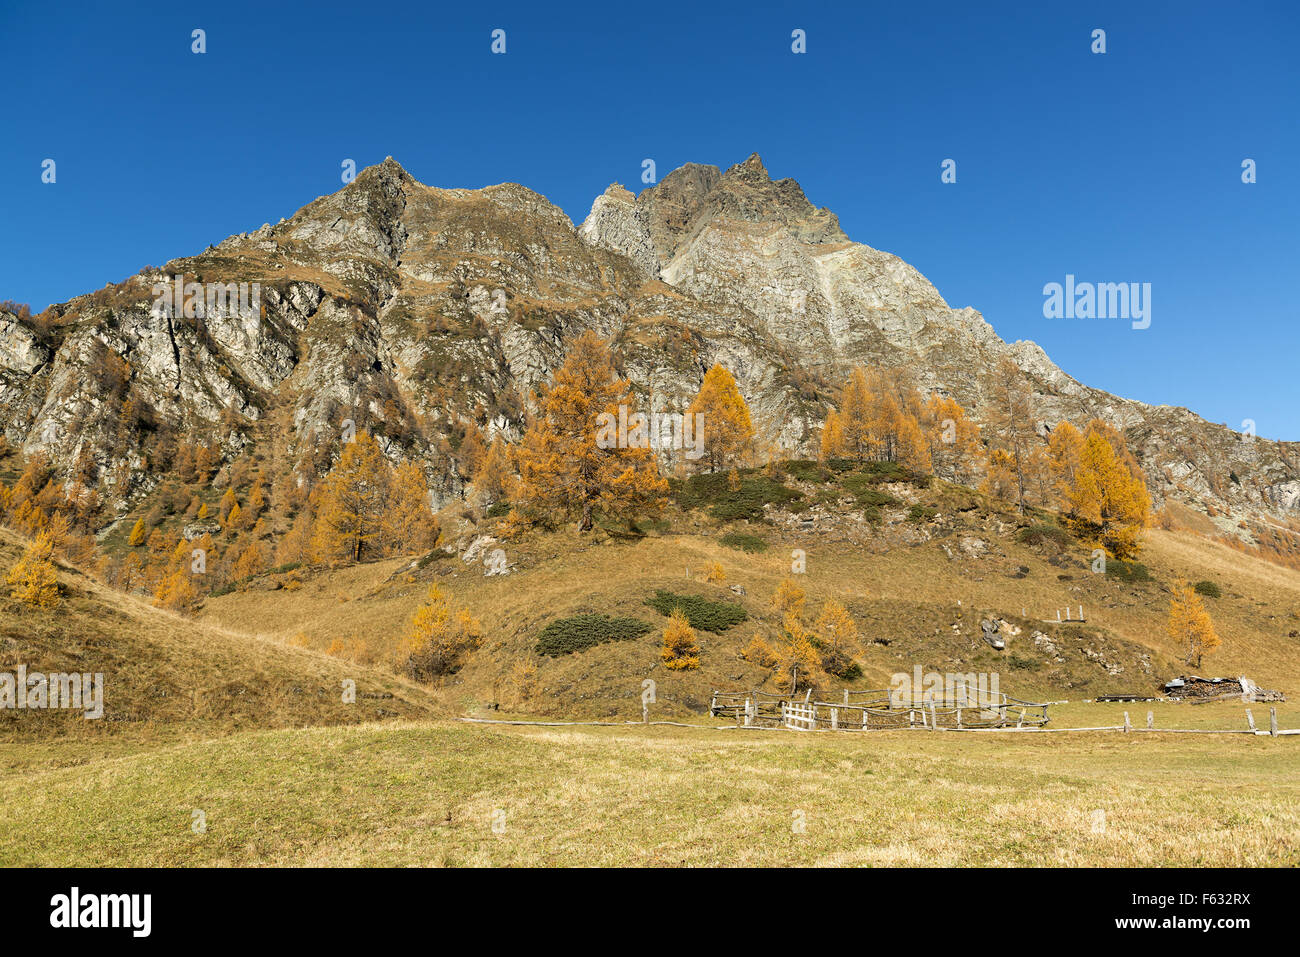 Autumn colors at the Devero Alp in a beautiful afternoon near the village of Crampiolo, Piedmont - Italy Stock Photo